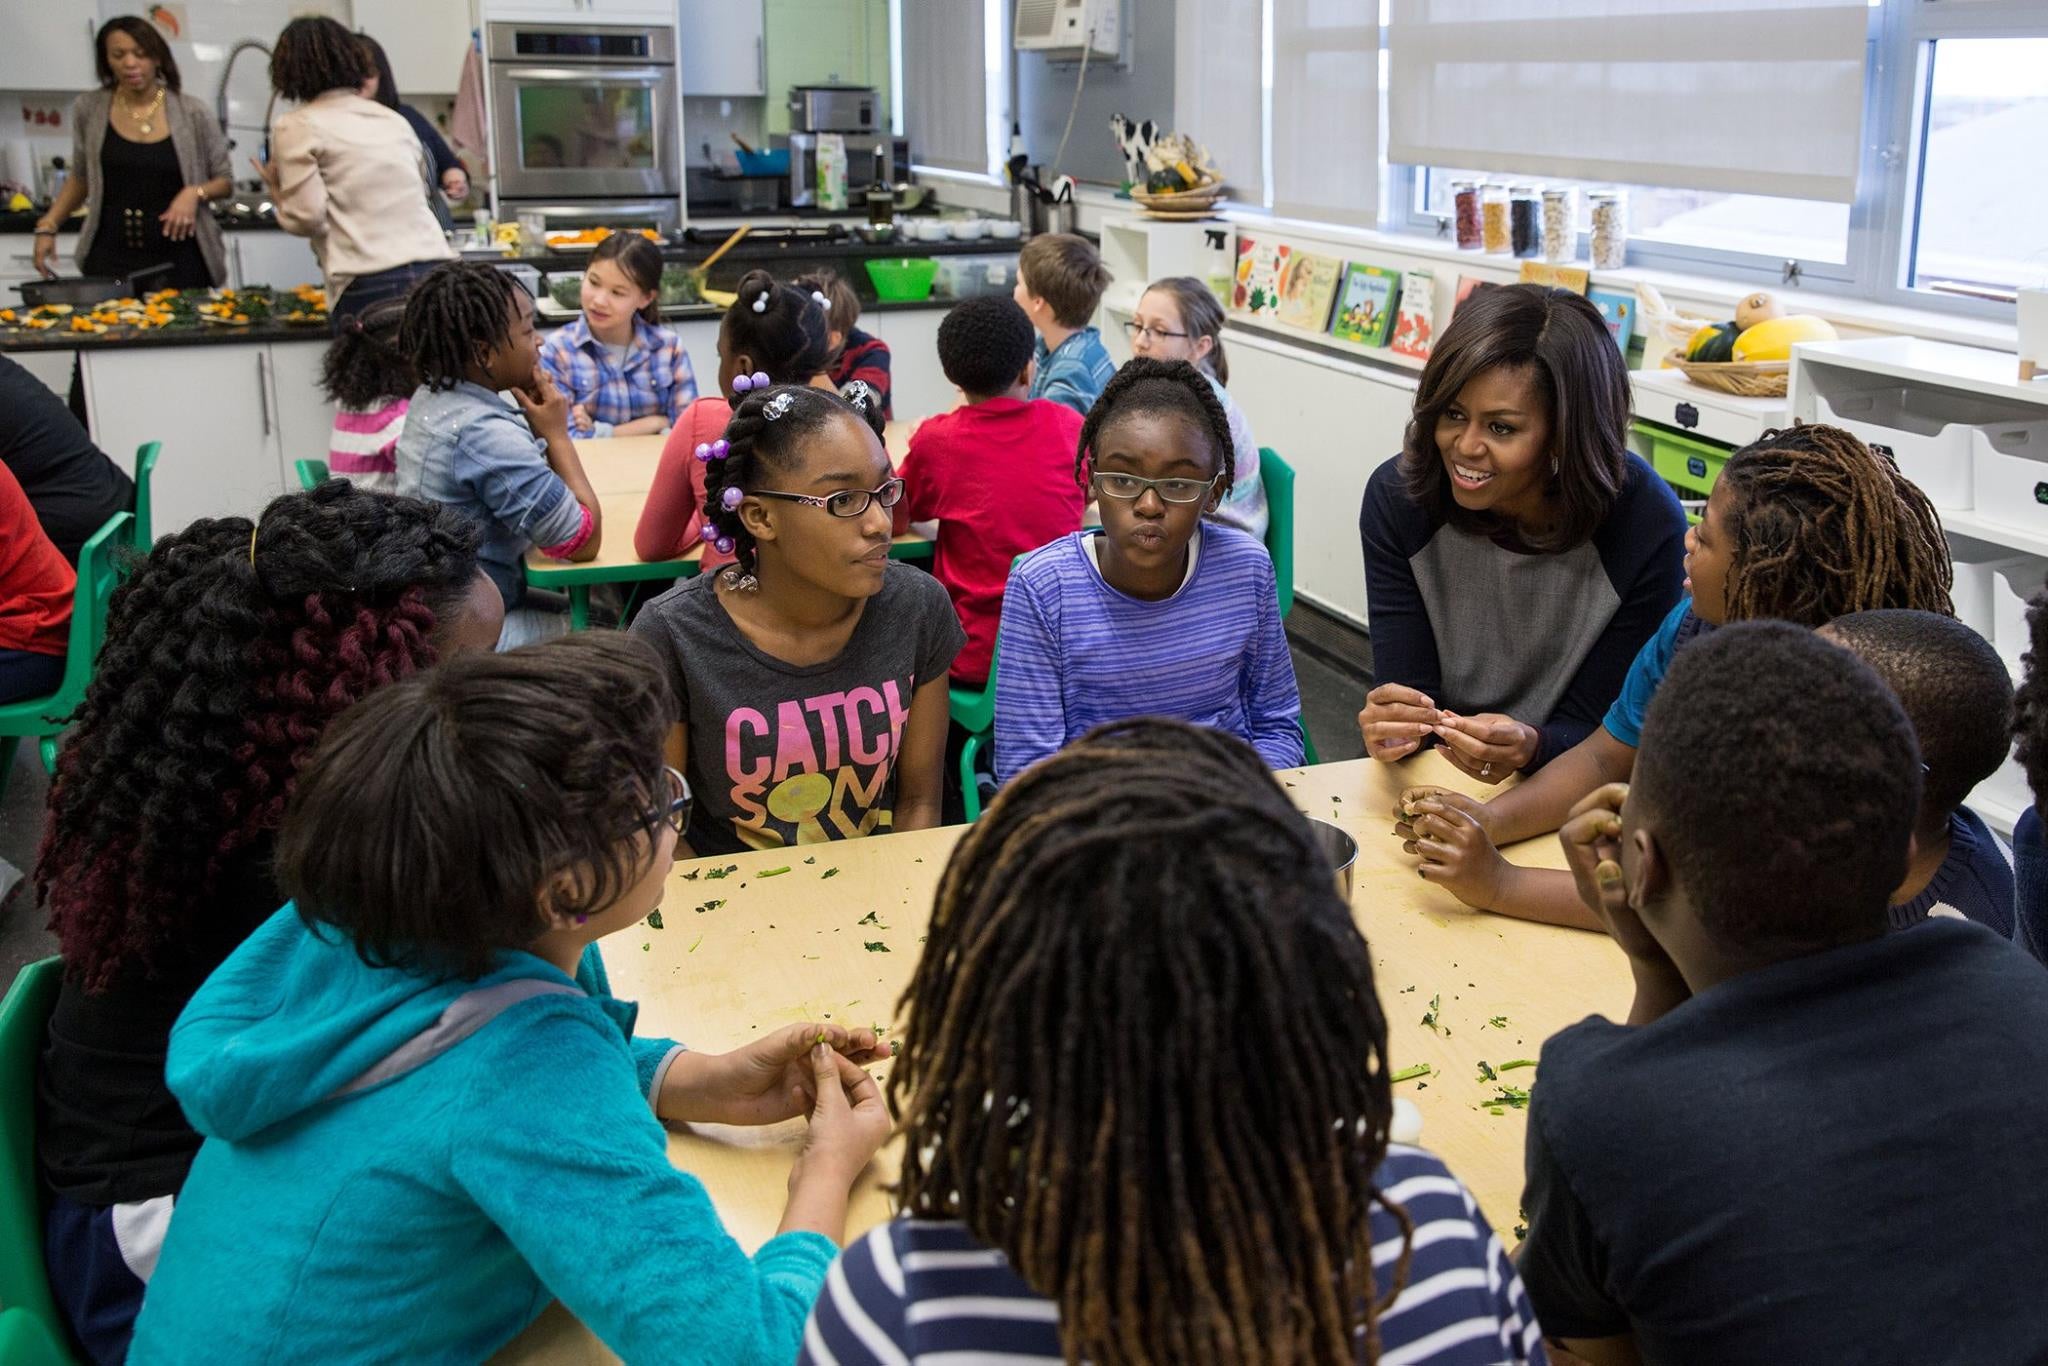 Michelle Obama Surprises Elementary School Students and Their Reactions Are Adorable!
